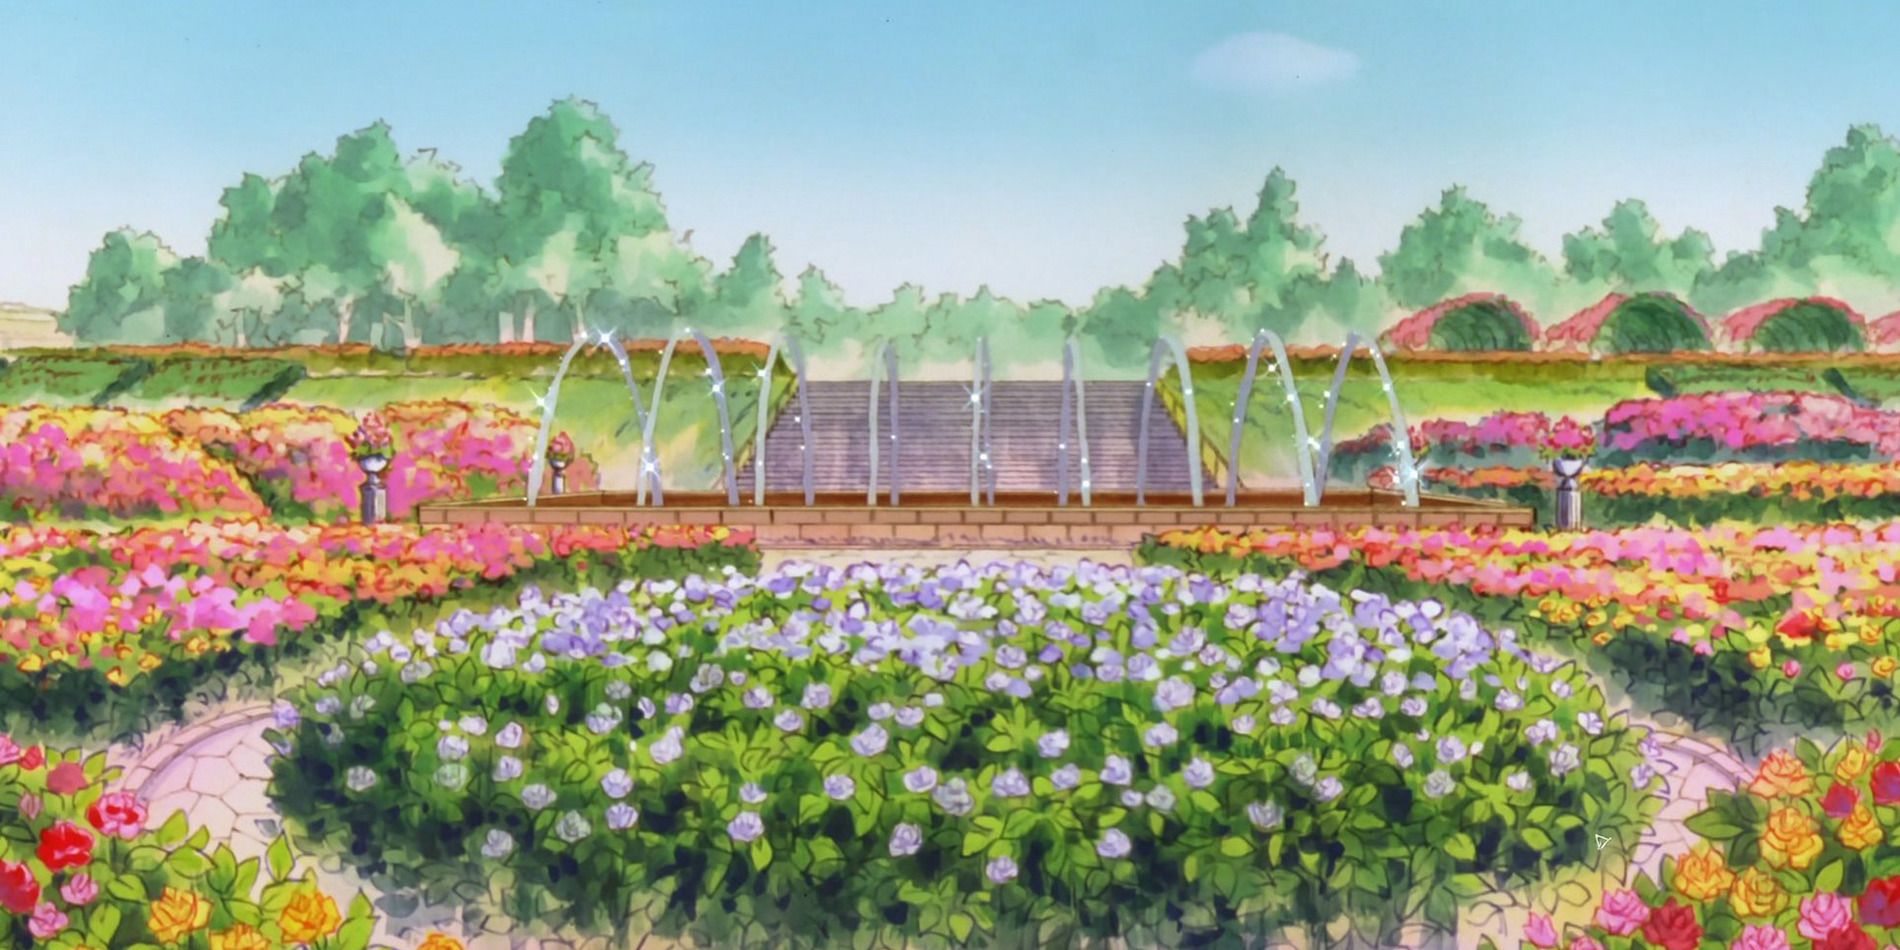 Gaea, Vision of Escaflowne, garden scene with a fountains and flowers